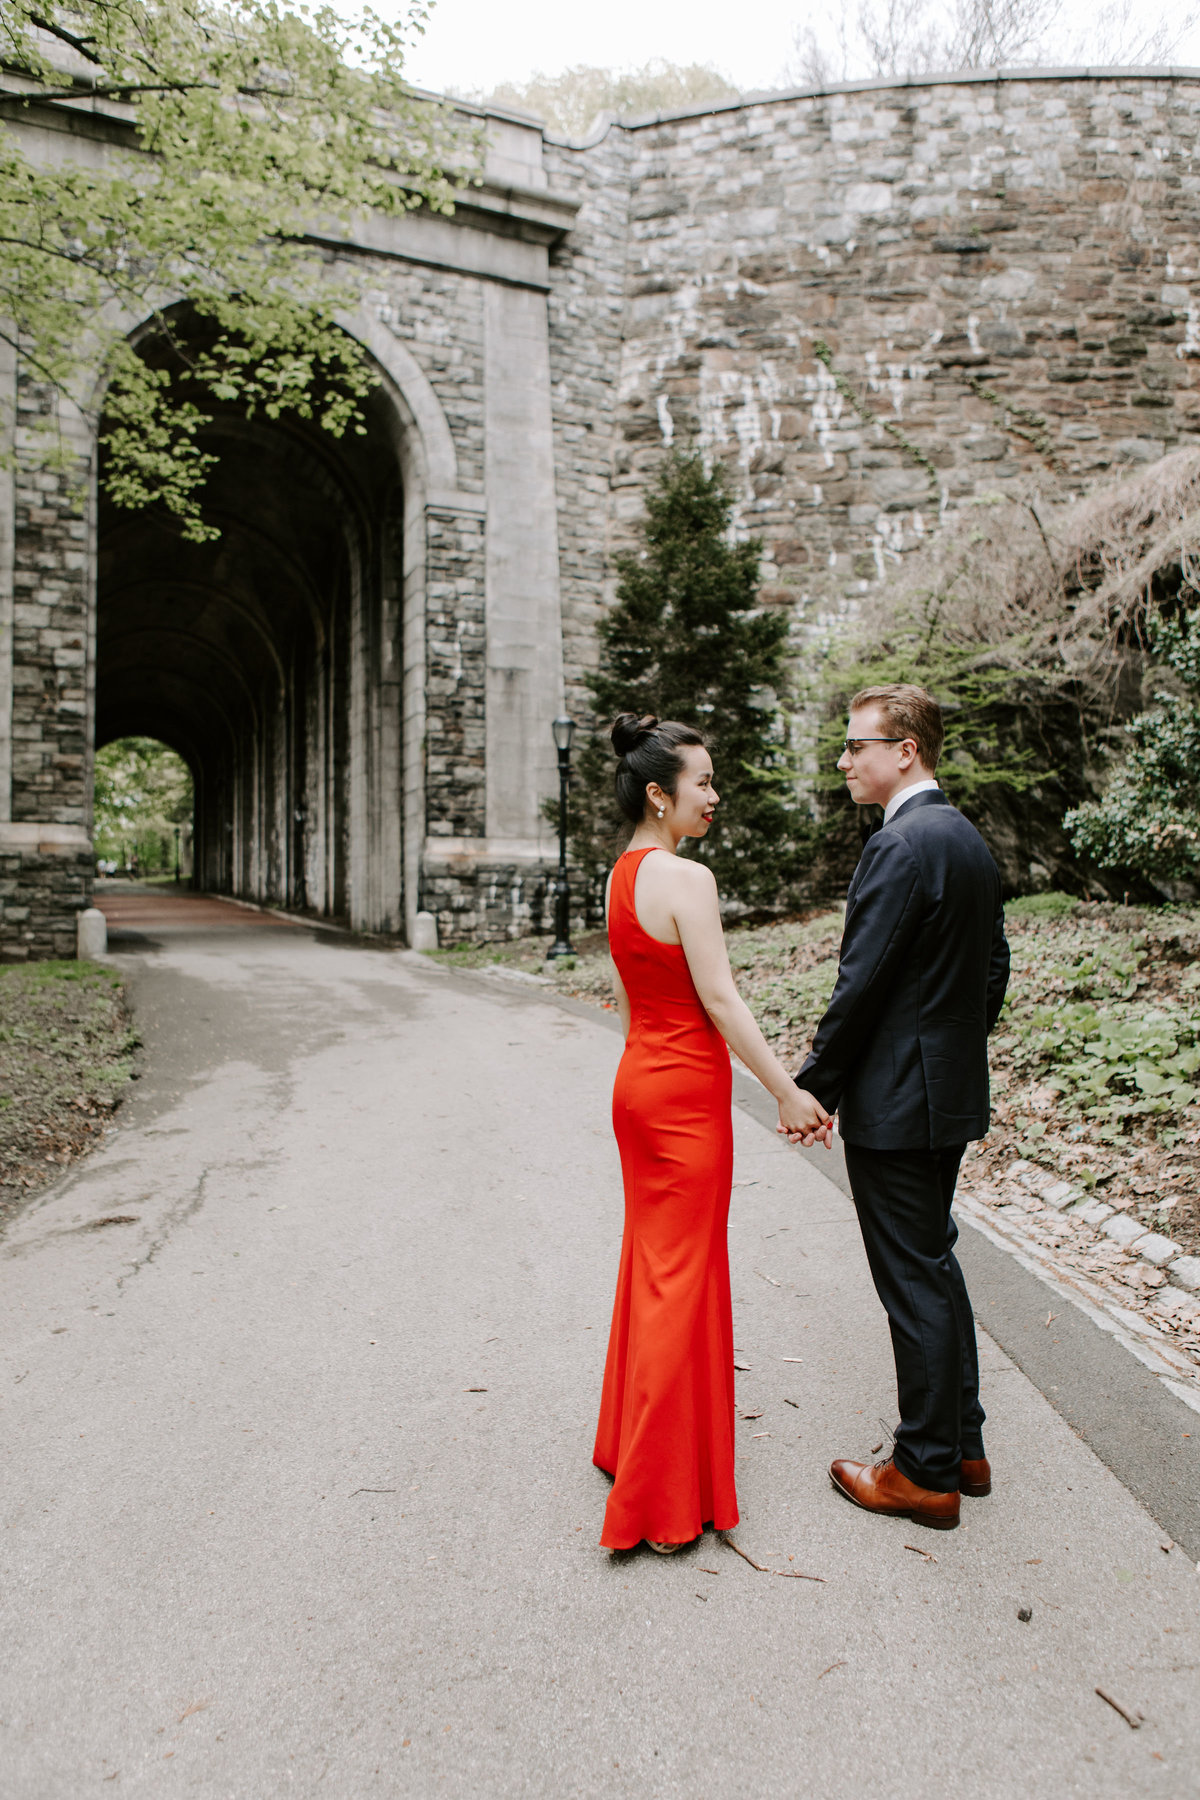 Violet-Yin-engagement_©2019daniellepearce-small-70